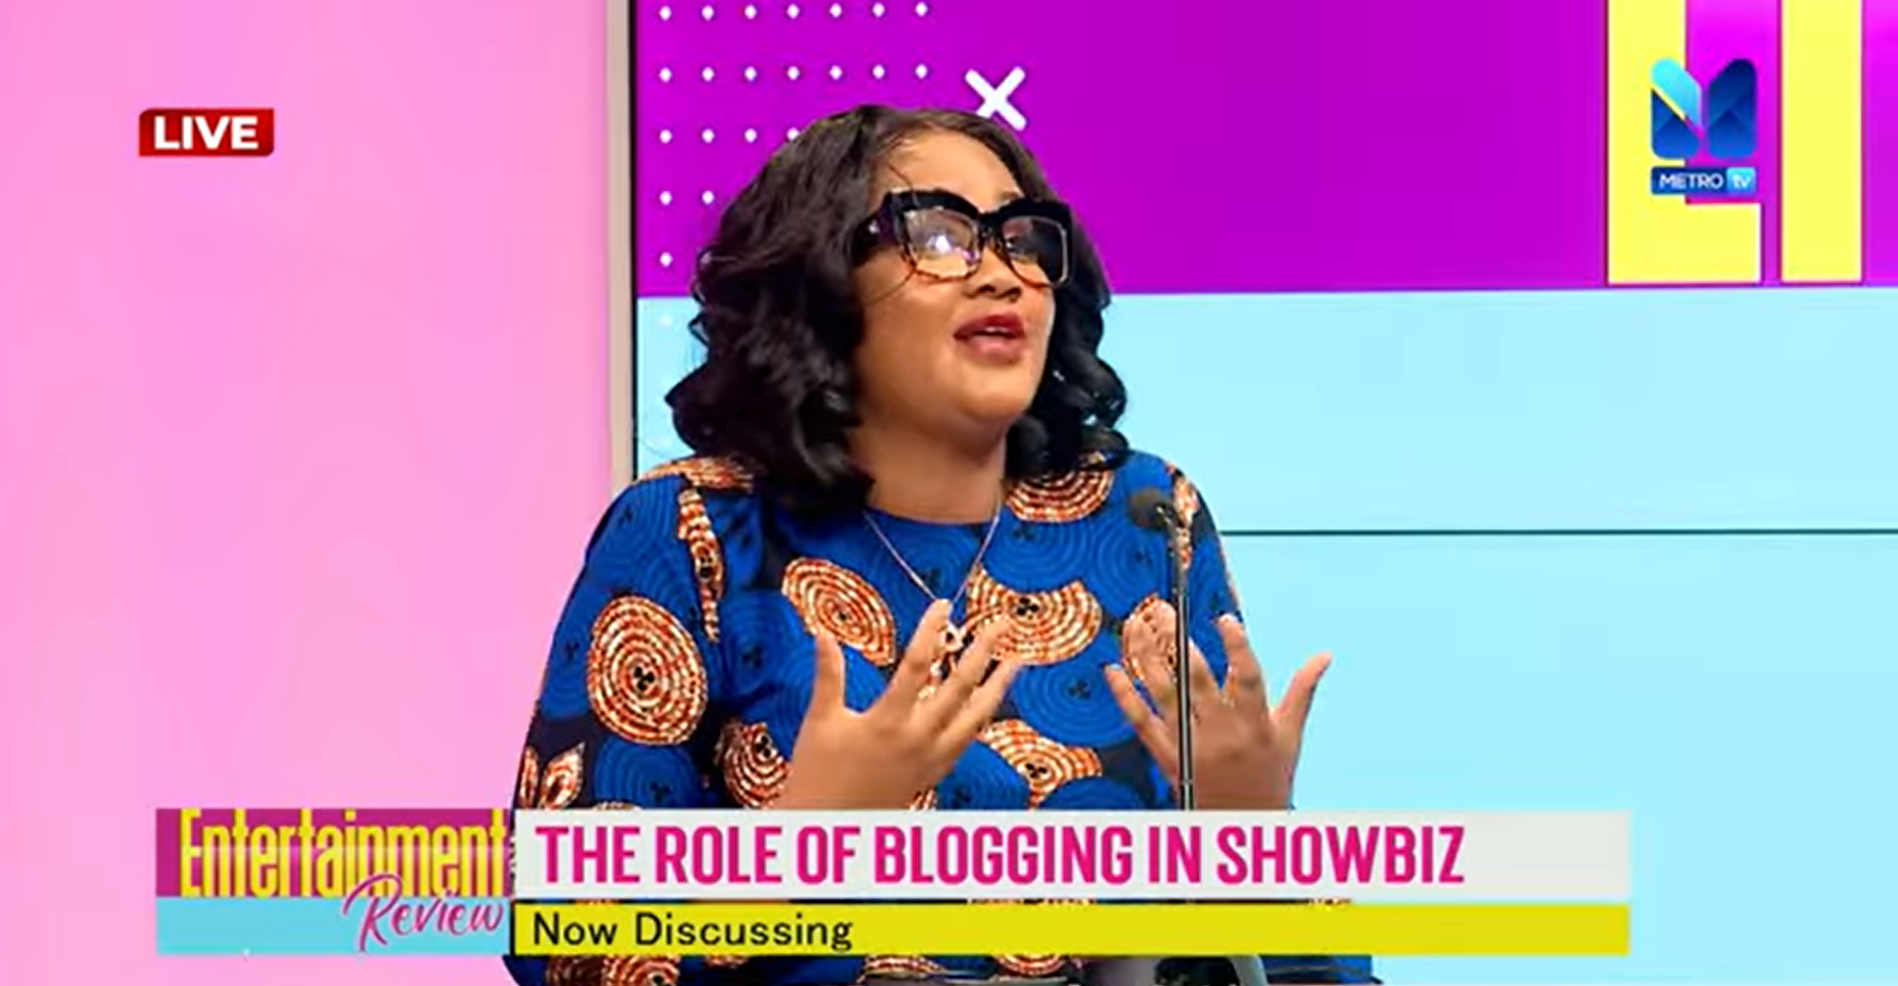 The role of blogging in showbiz